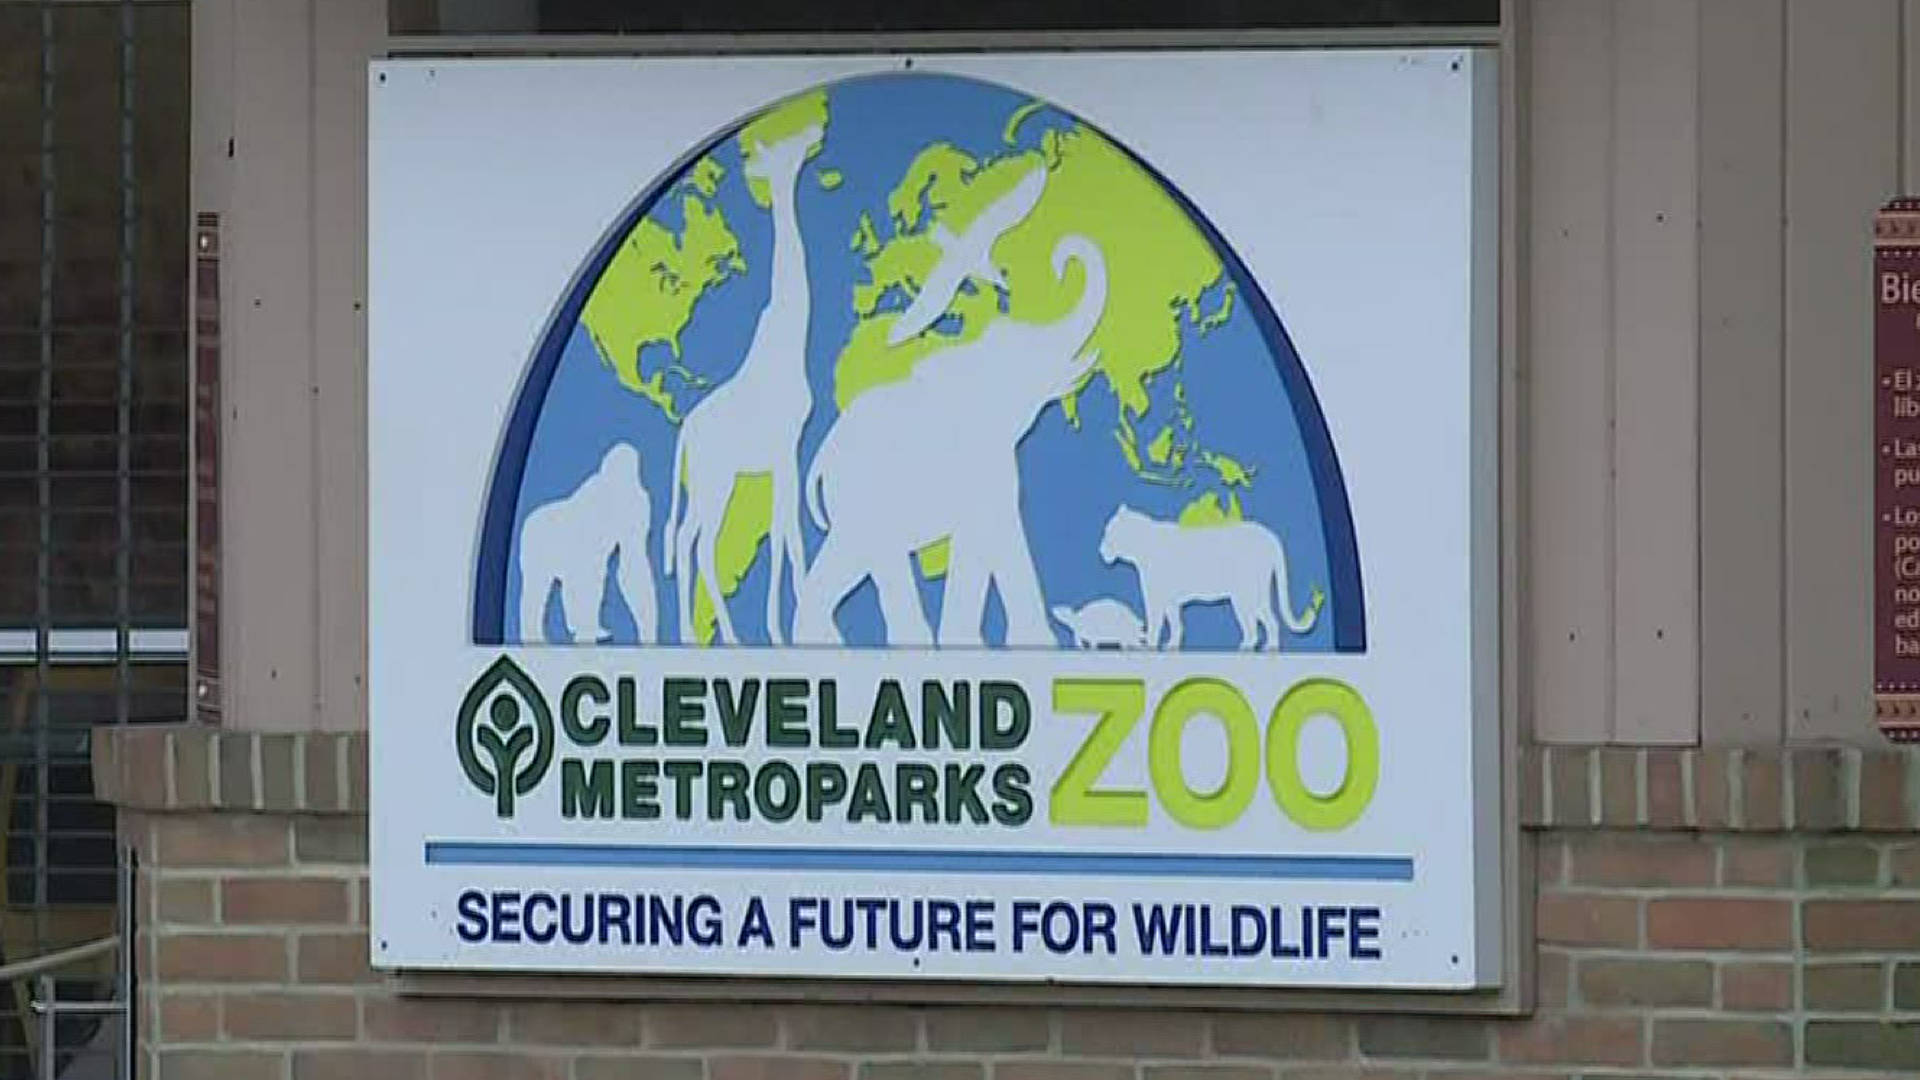 The Cleveland Metroparks Zoo has been closed for six weeks and they are also adapting to the new normal.The animals are being well taken care of.